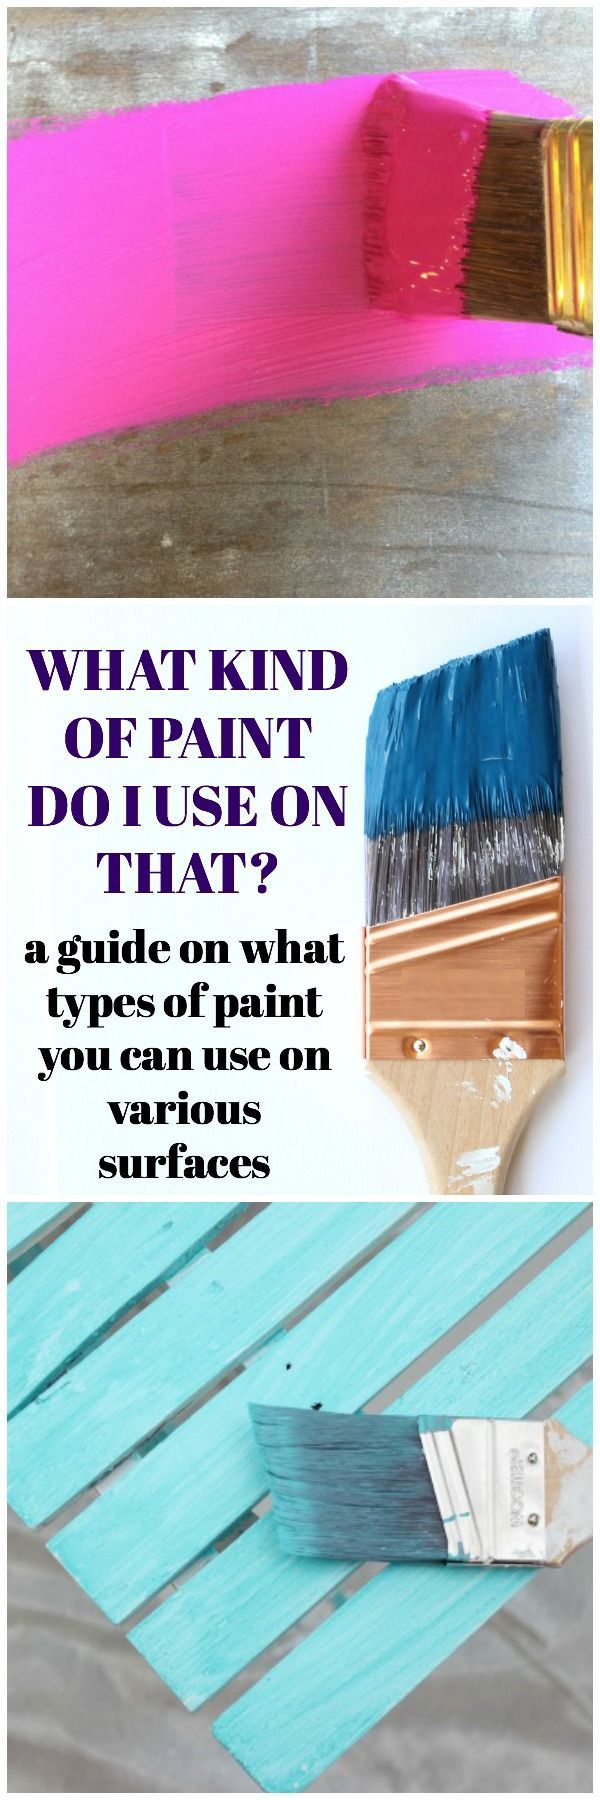 Guide to paint types for various surfaces. Types of Paint for Furniture | Paint ...